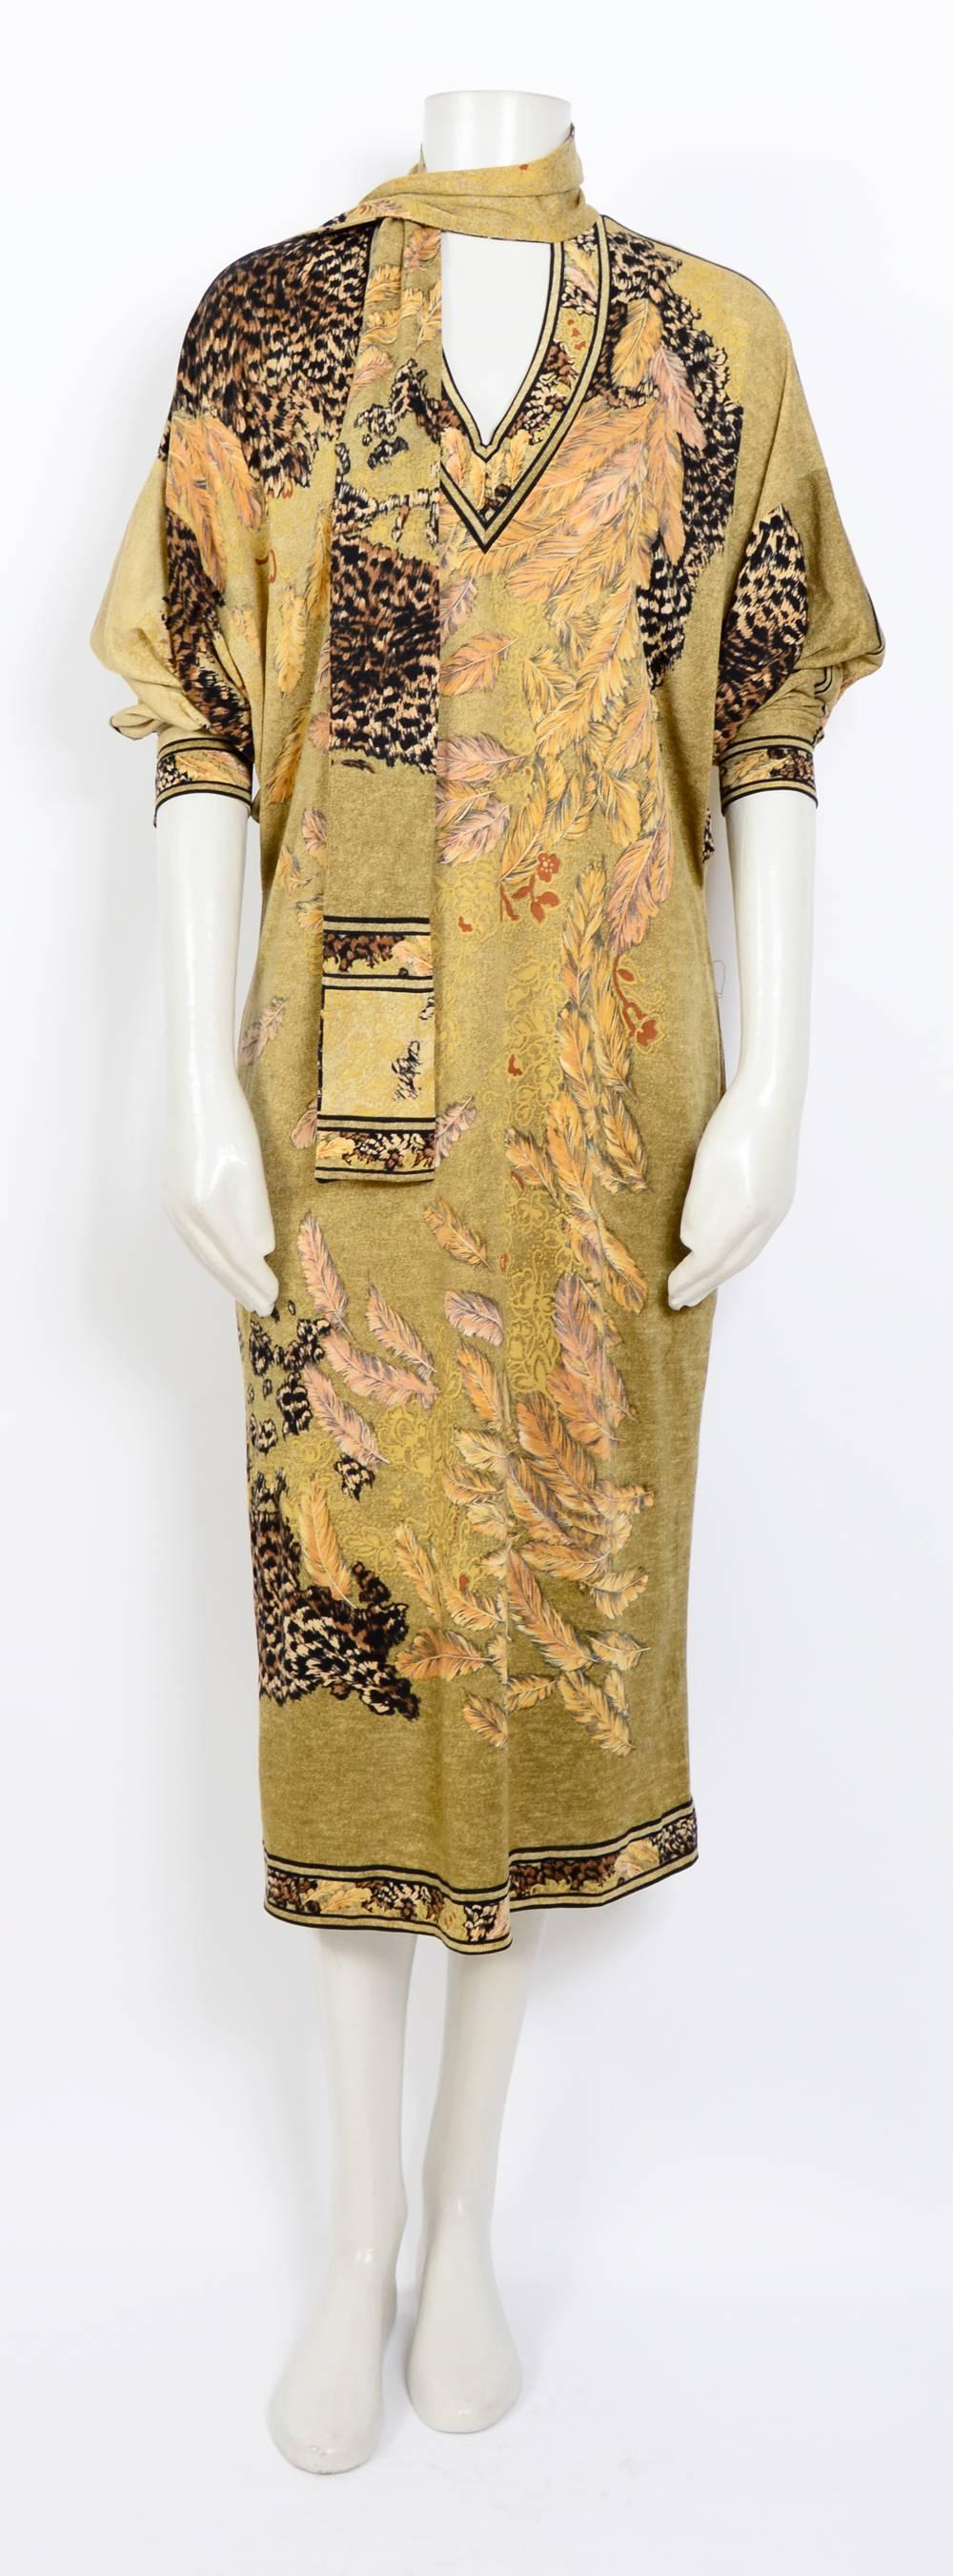 Leonard vintage 1970s feather print jersey dress with matching belt For Sale 1